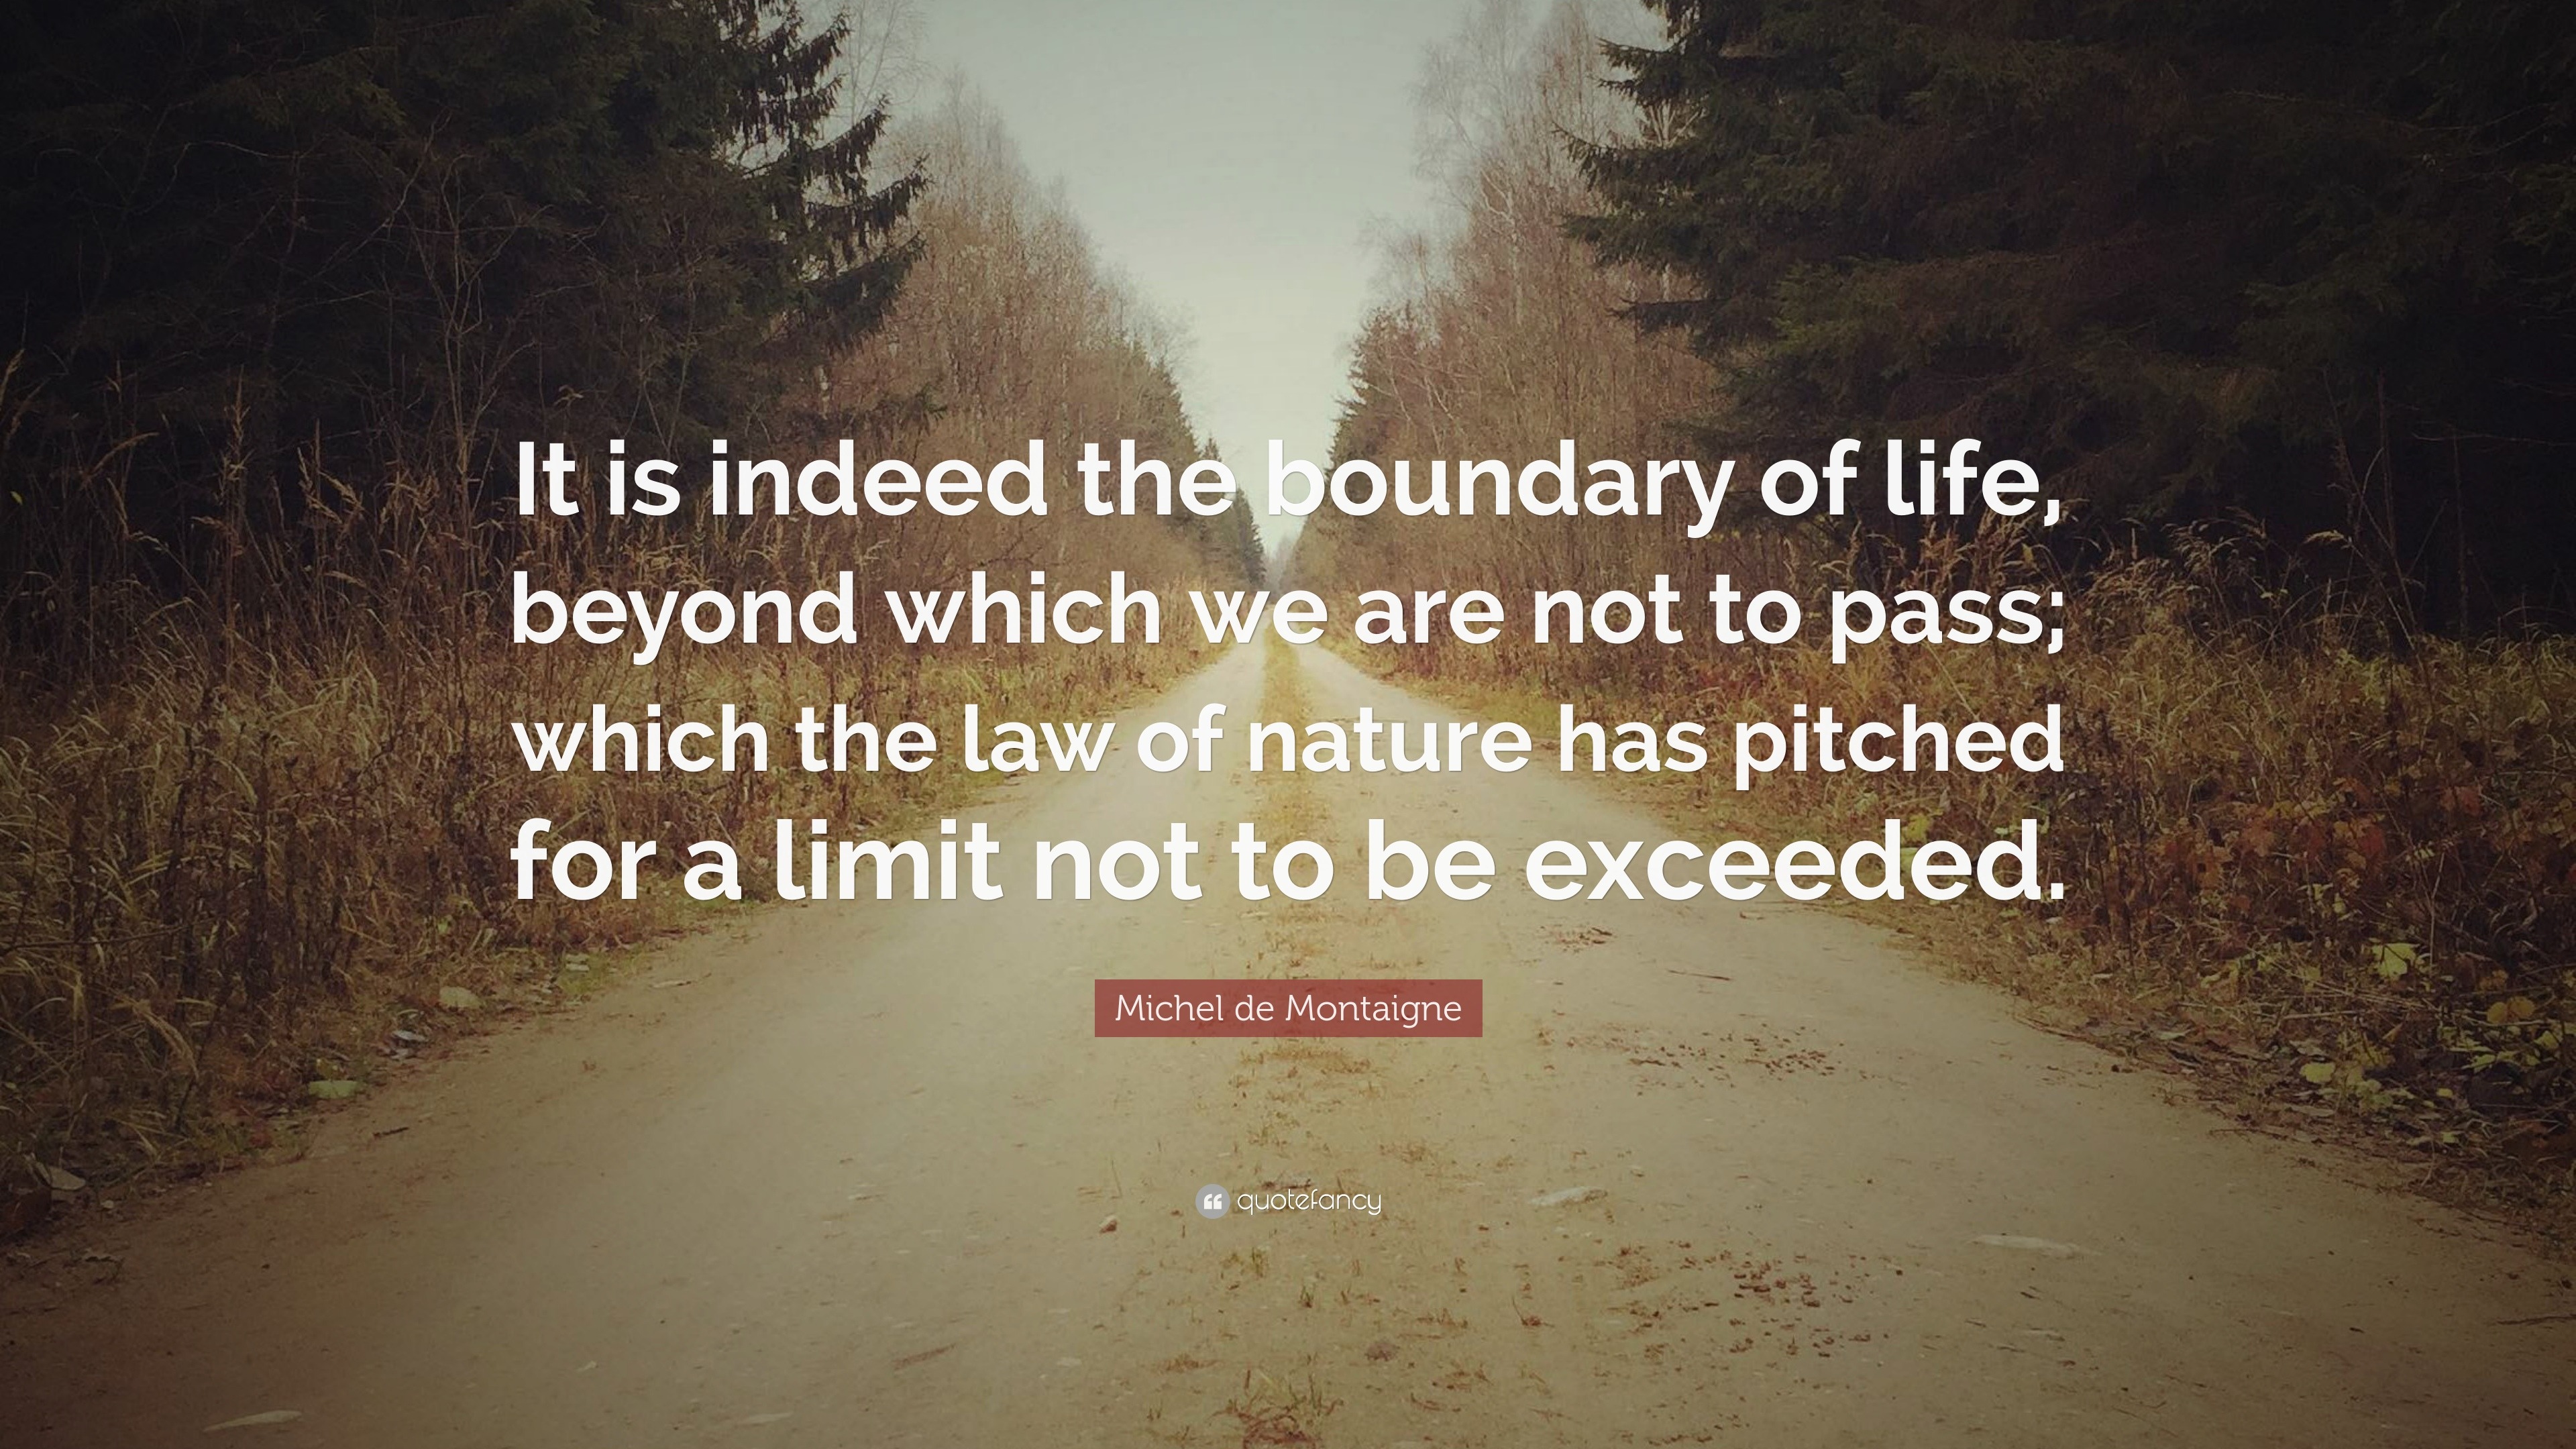 Michel de Montaigne Quote: “It is indeed the boundary of life, beyond ...